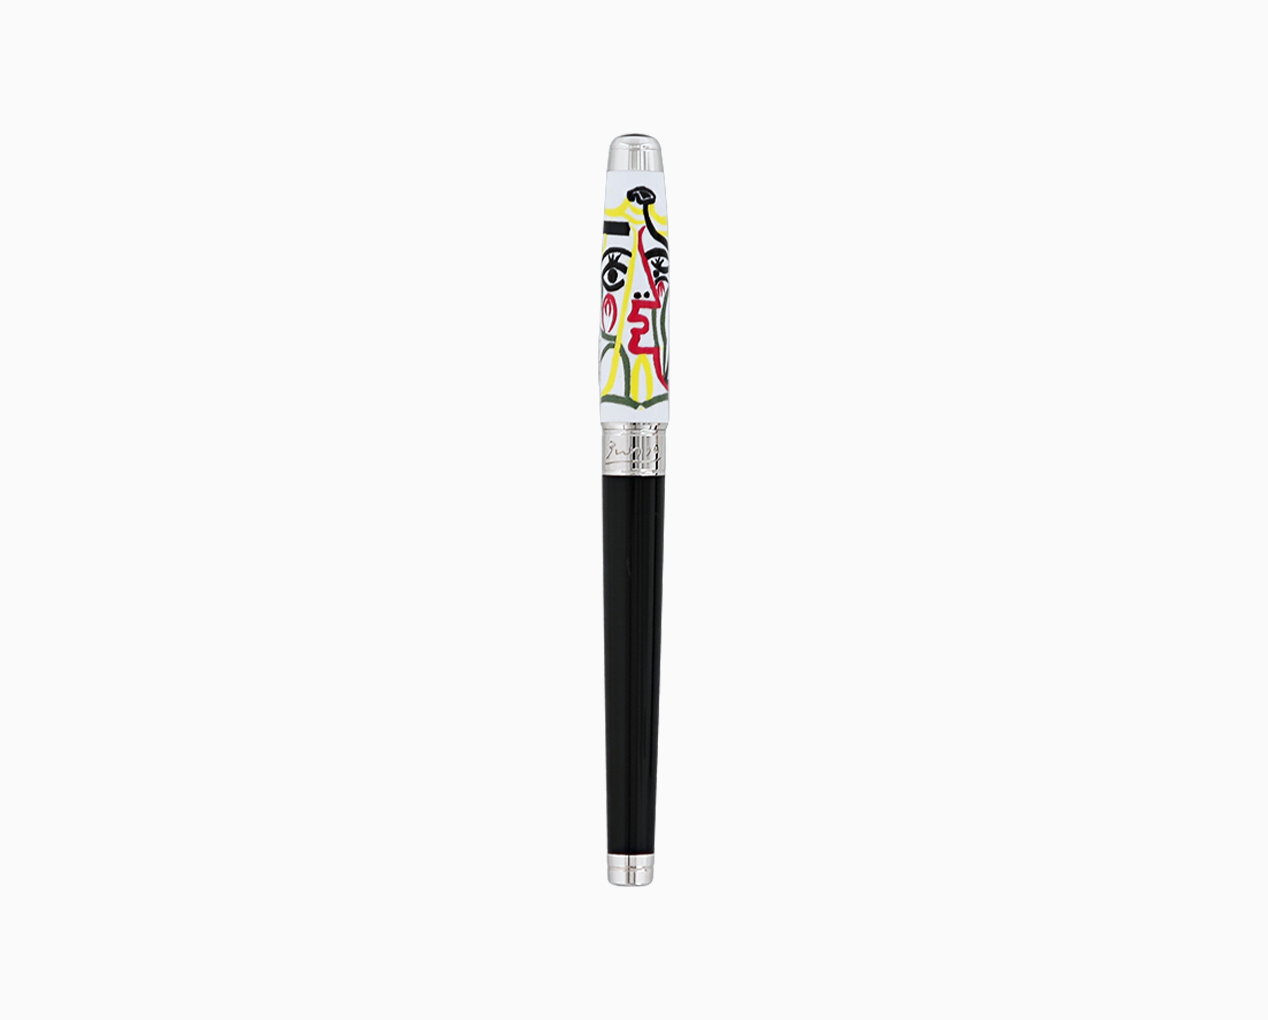  Rick And Morty Pen